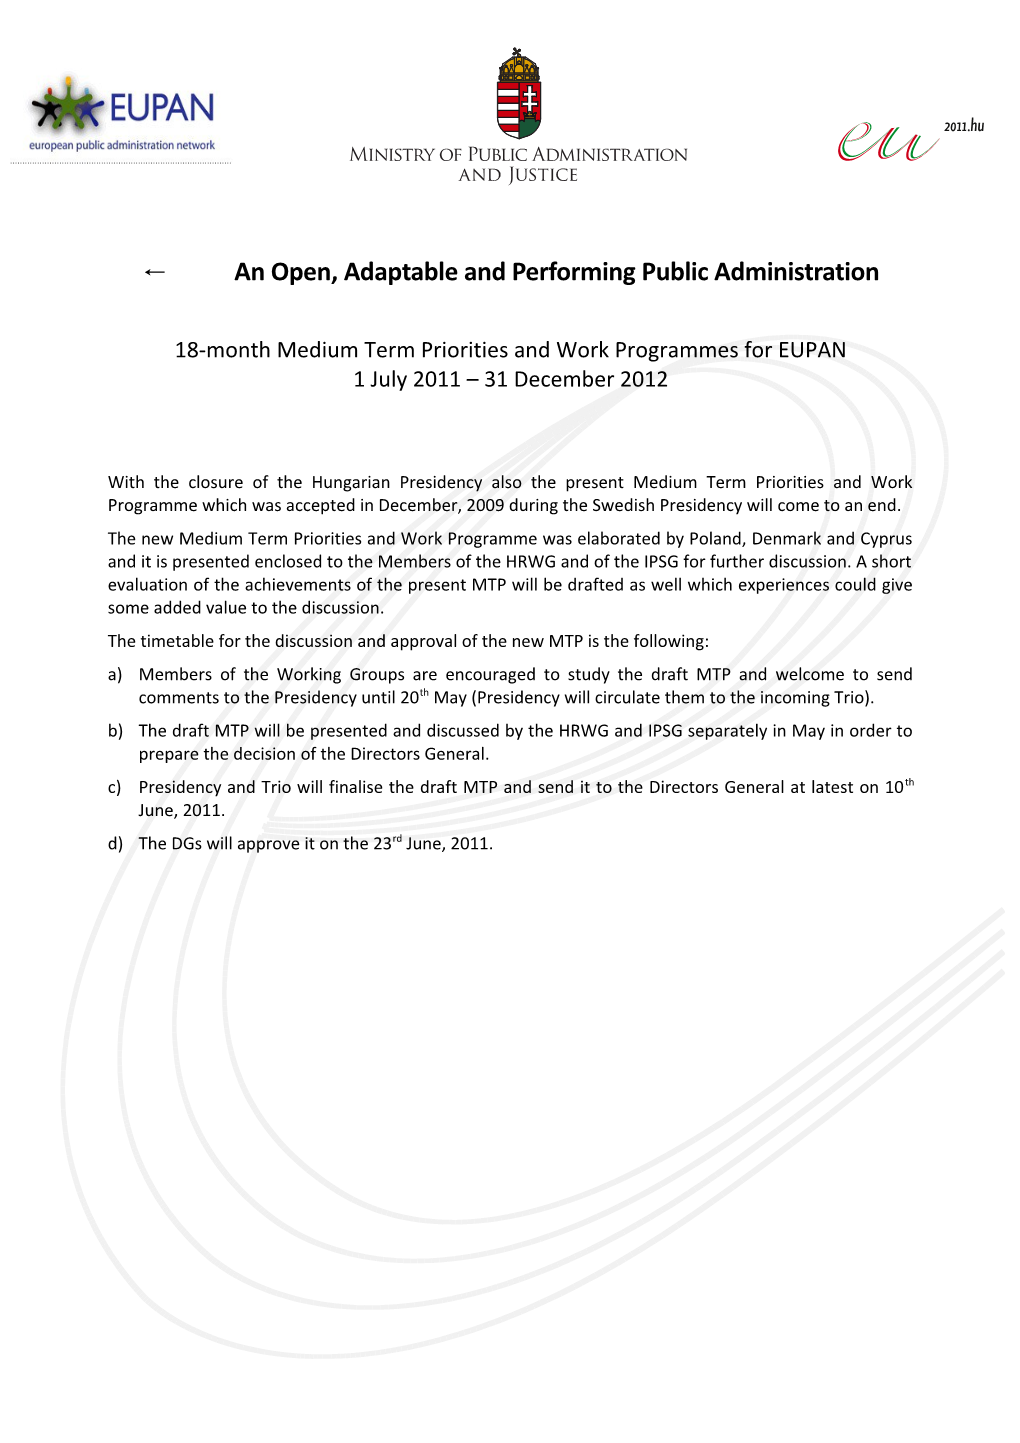 An Open, Adaptable and Performing Public Administration